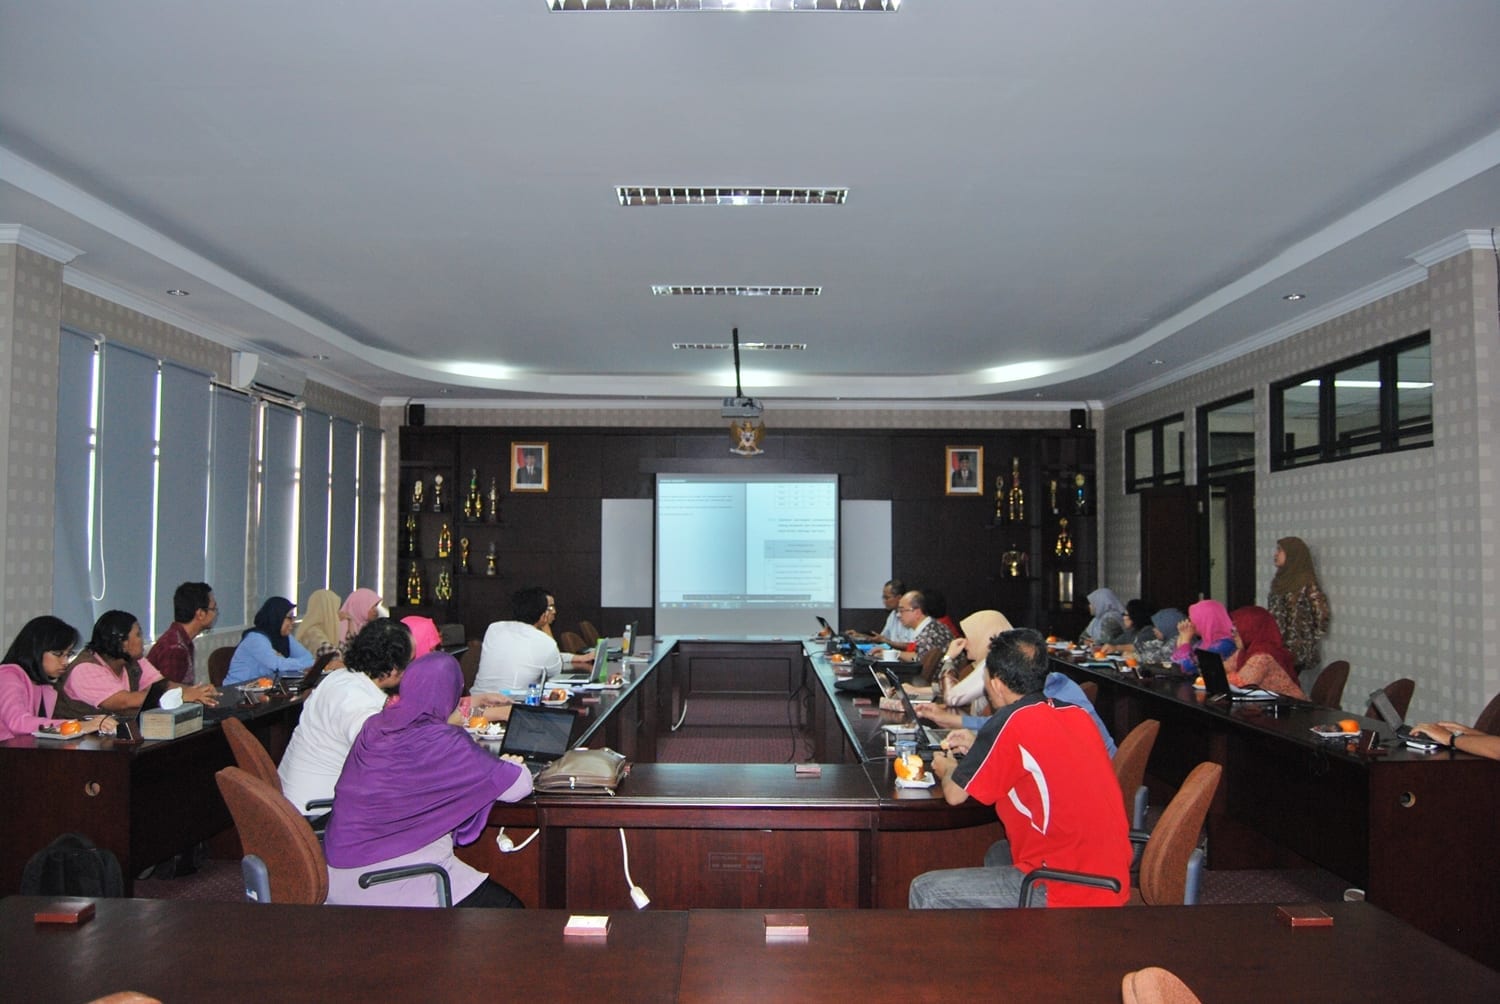 Gallery of Simulation of Accreditation Meeting